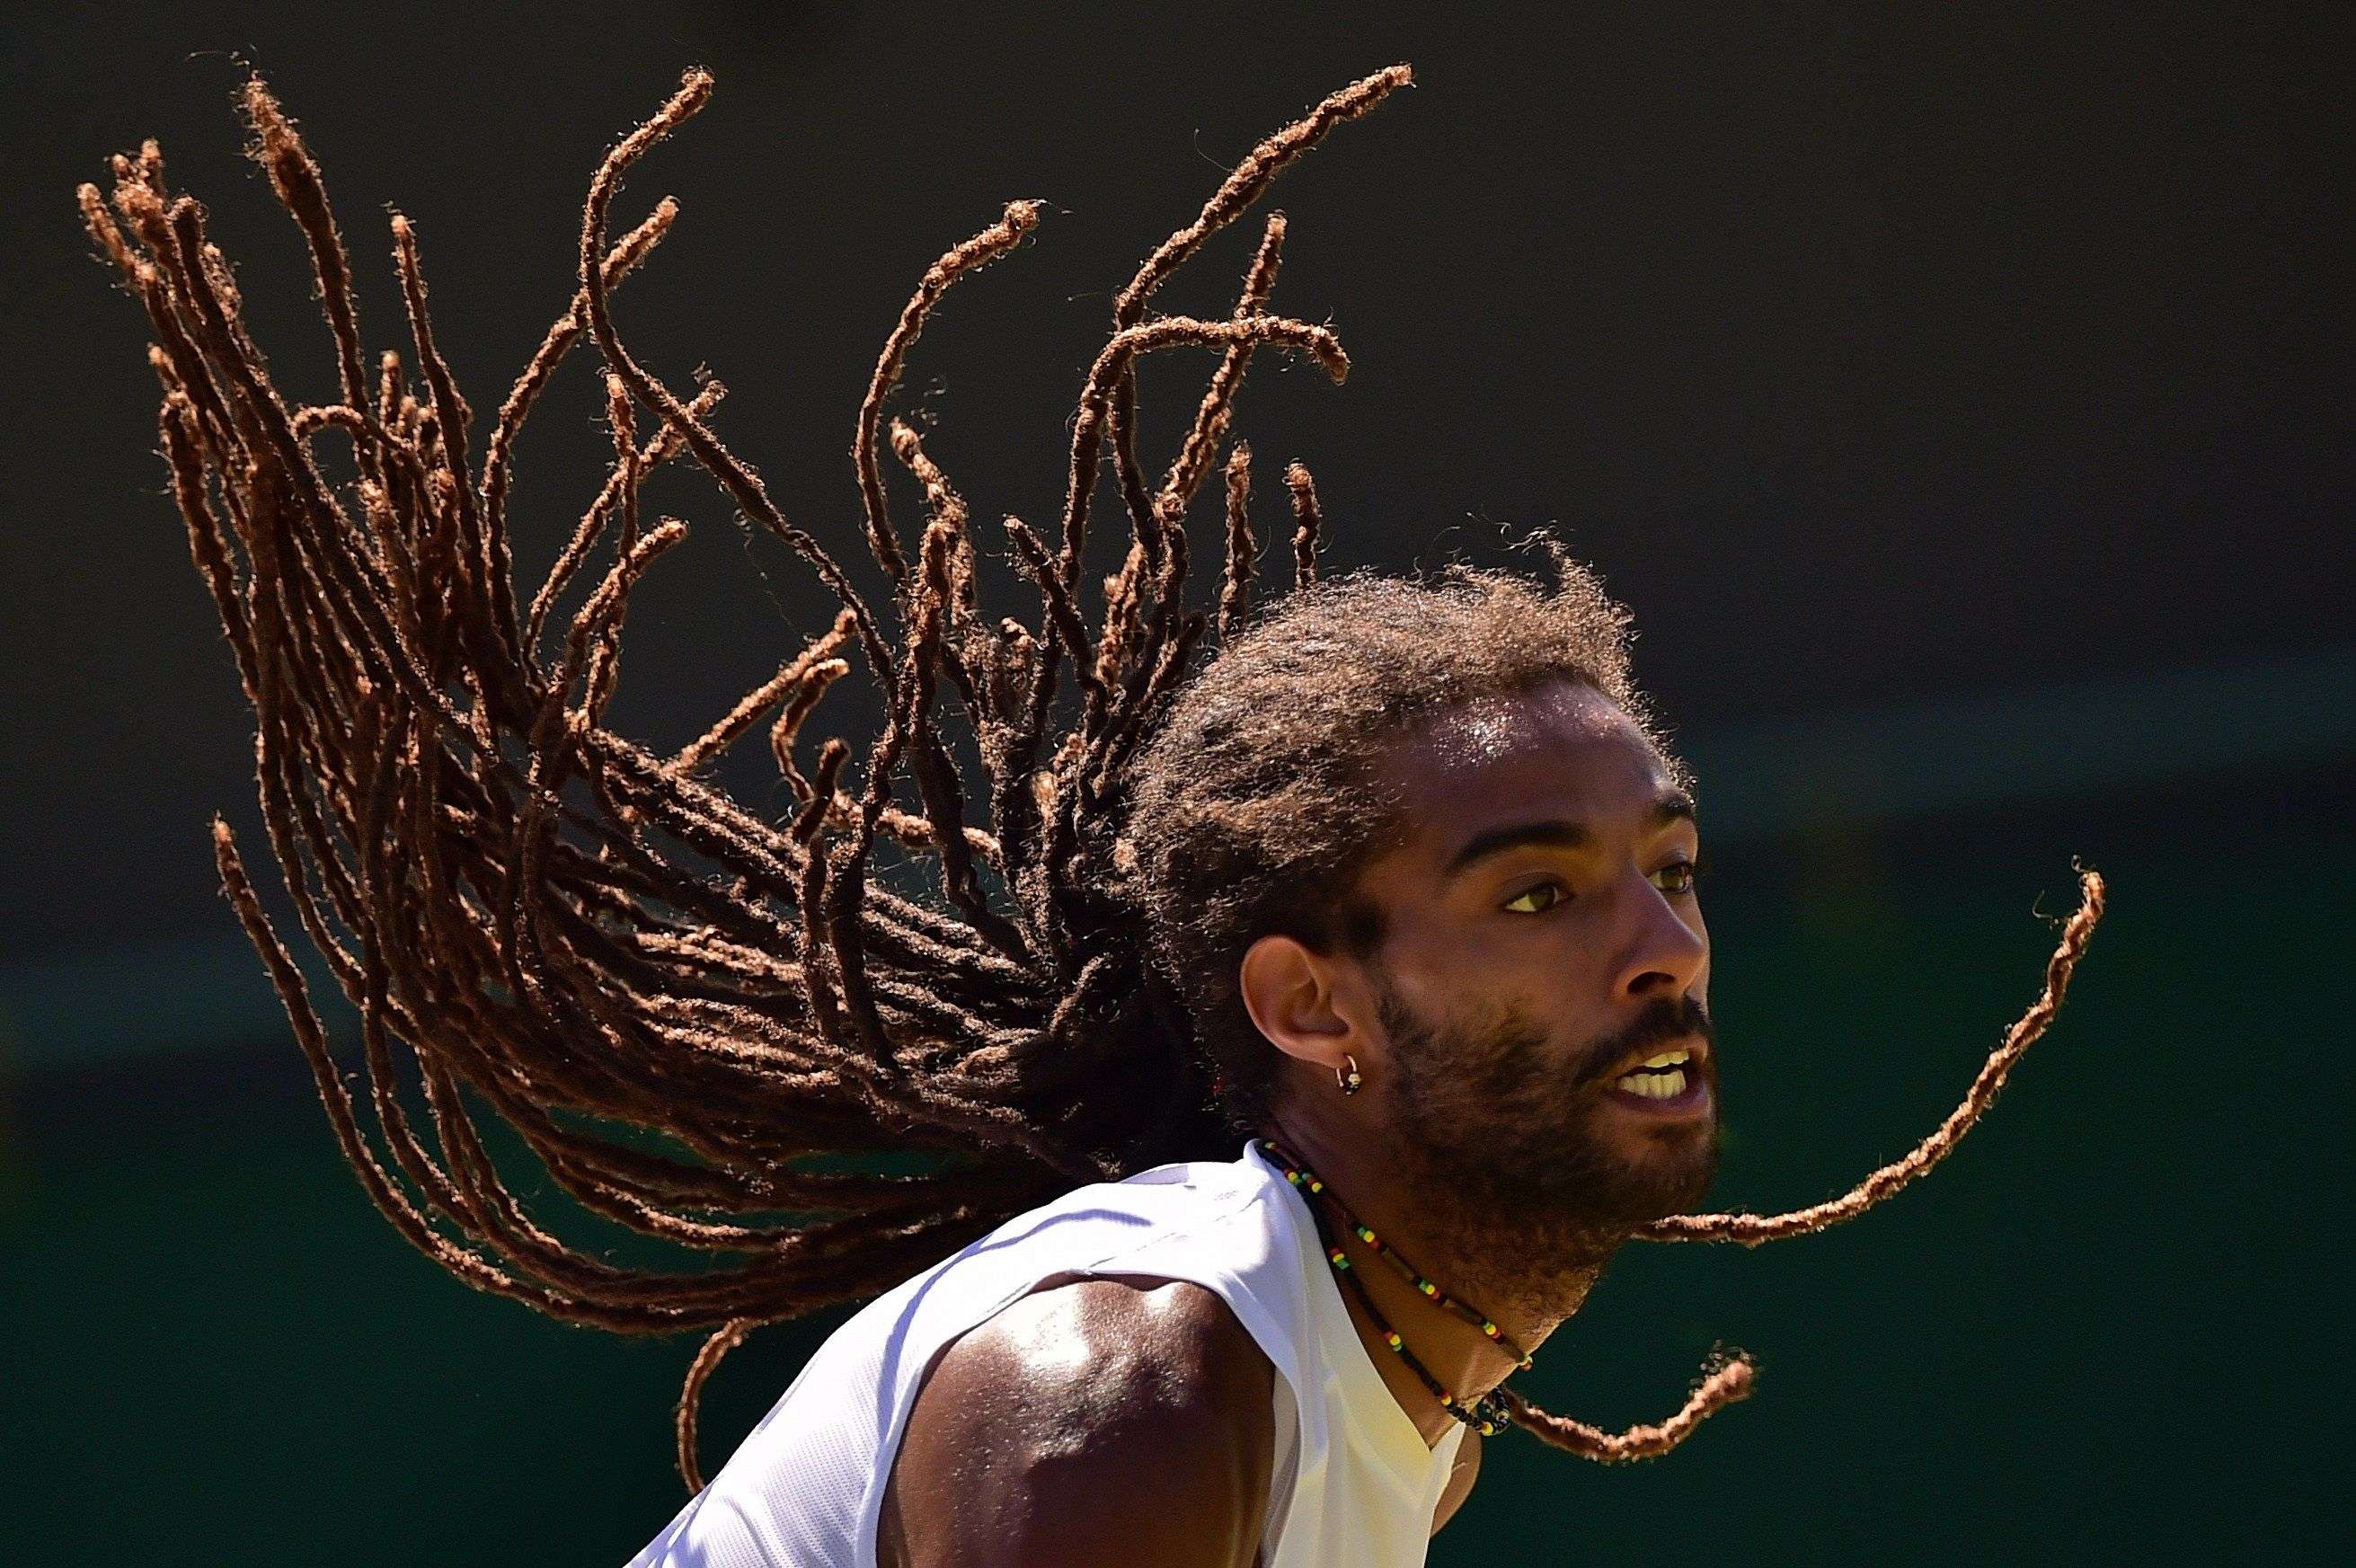 Germany's Dustin Brown waits to receive a serve from Serbia's Viktor Troicki during their men's singles third round match on day six of the 2015 Wimbledon Championships at The All England Tennis Club in Wimbledon, southwest London. (AFP PHOTO / LEON NEAL)